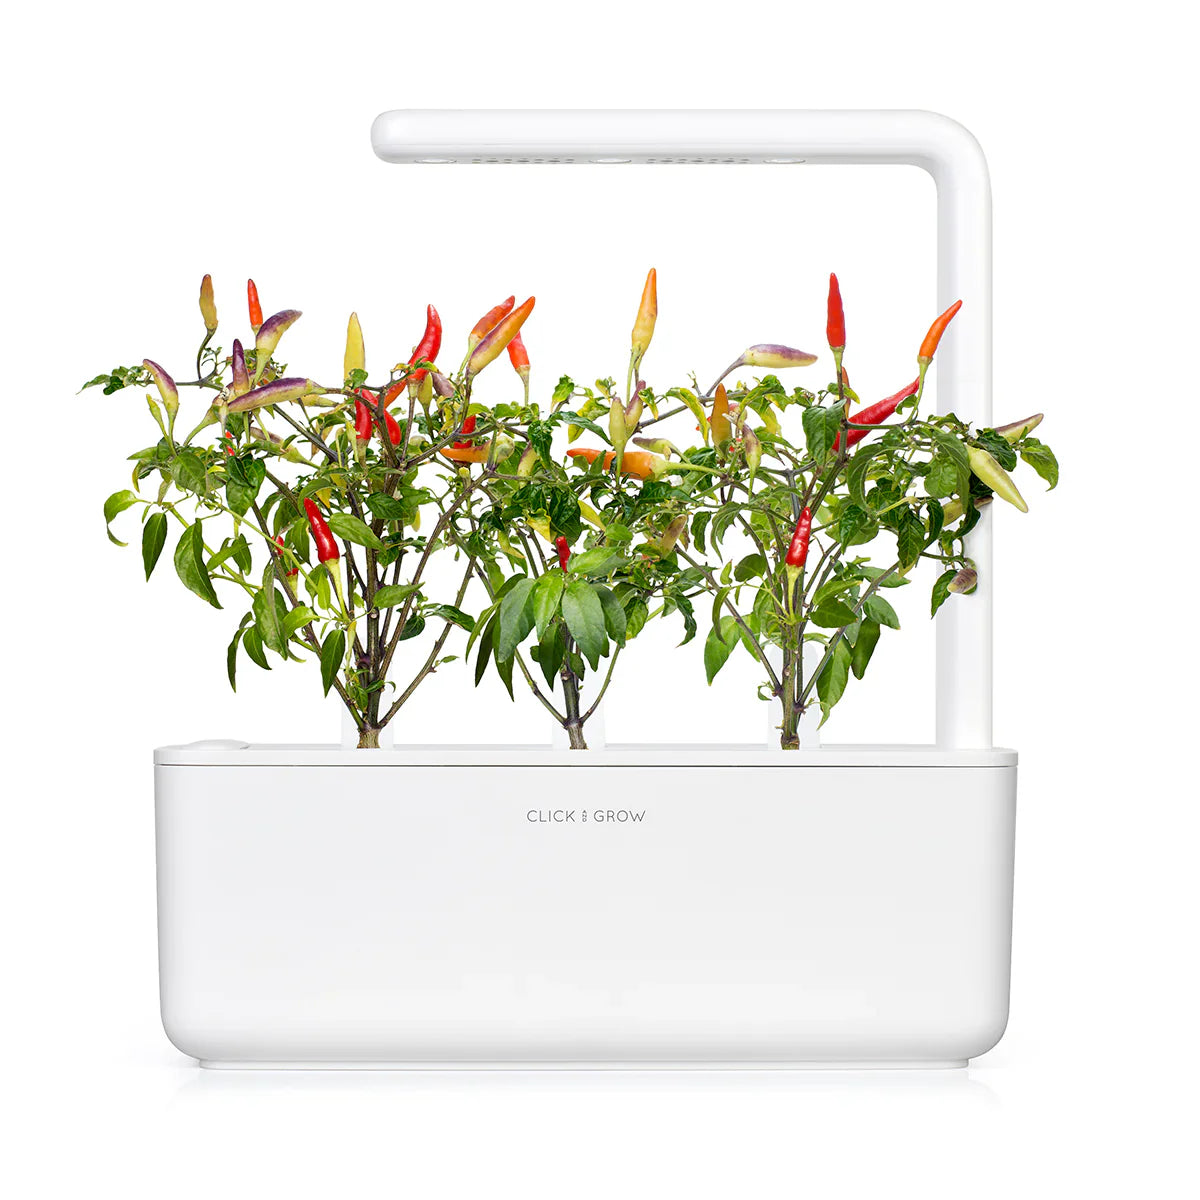 Click & Grow Smart Garden 9 with Red Hot Chili Peppers